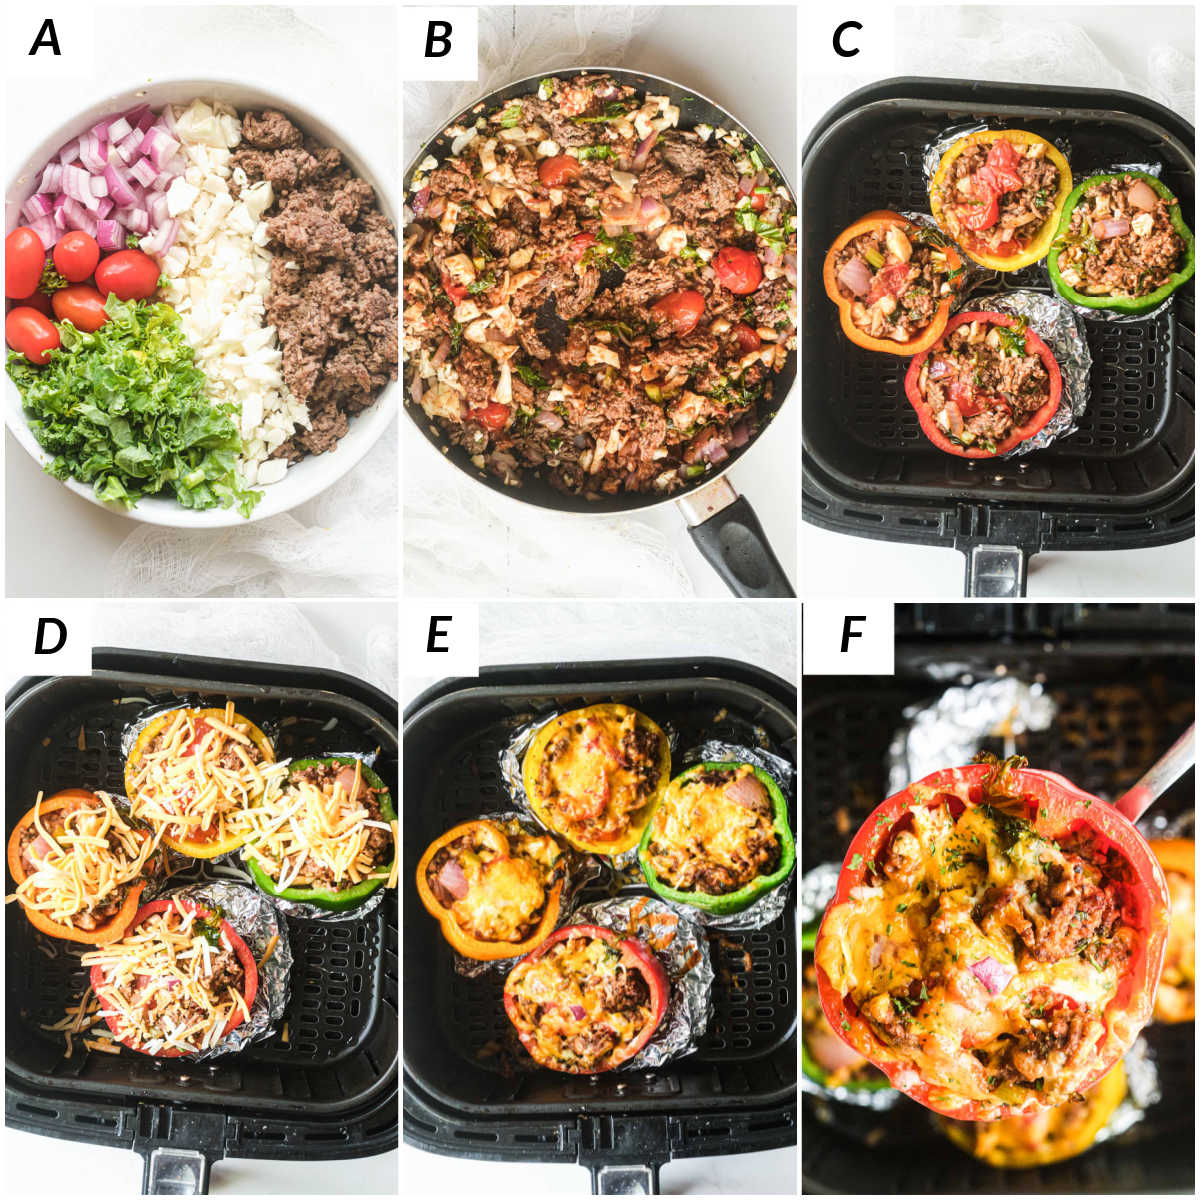 image collage showing the steps for making air fryer stuffed peppers